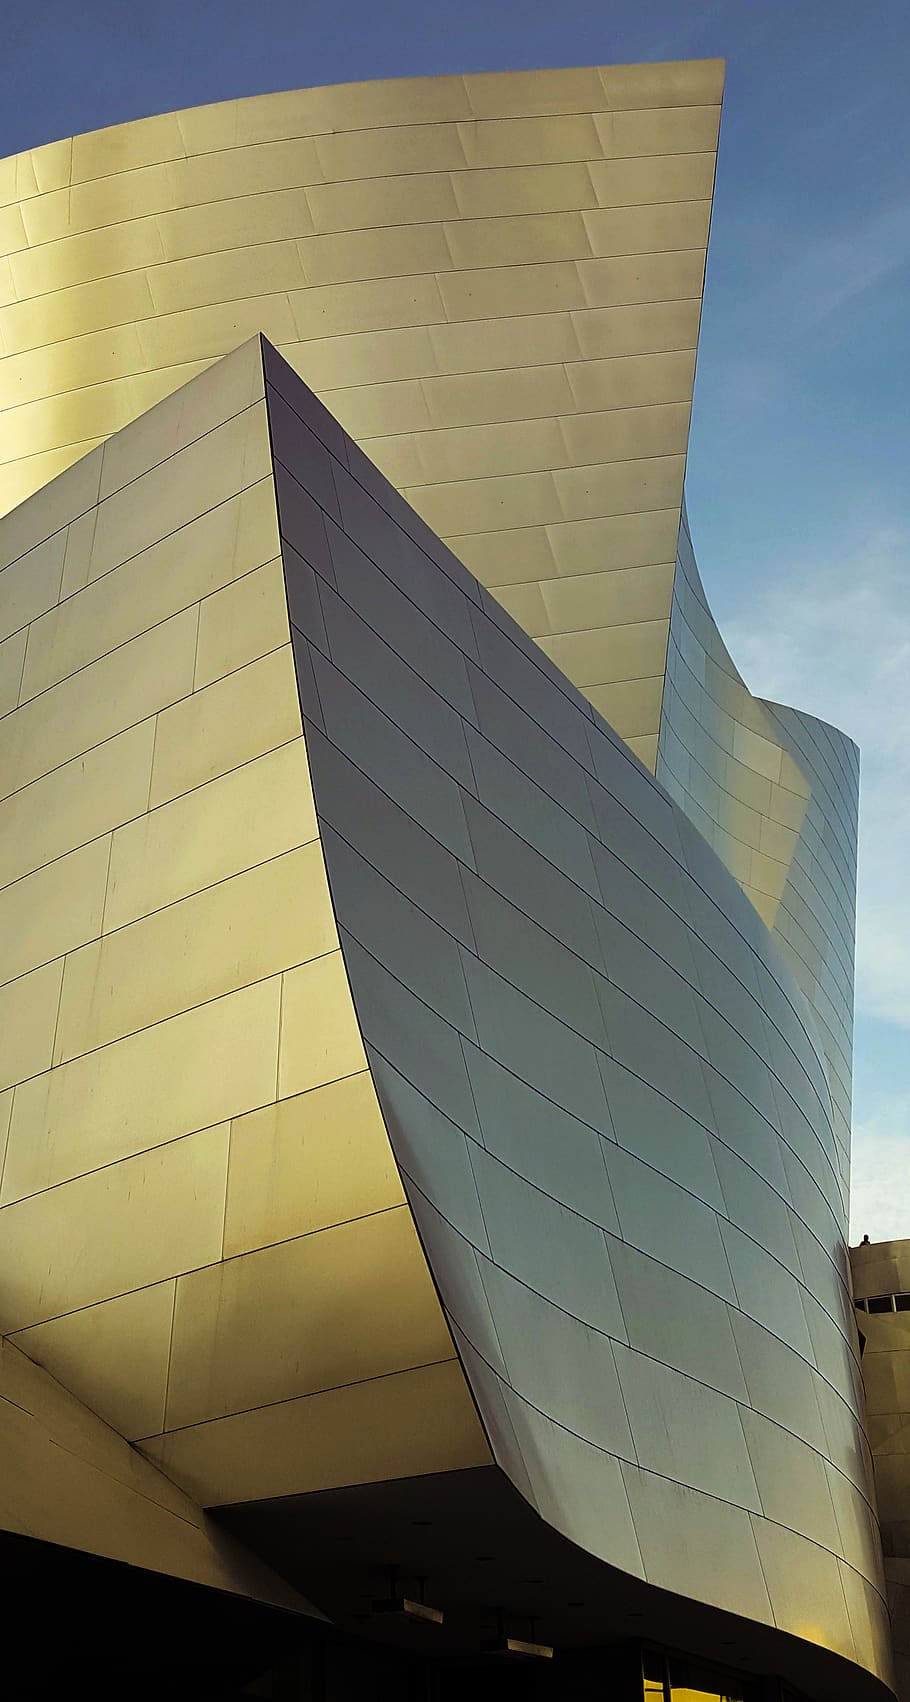 los angeles, walt disney concert hall, frank gehry, architecture